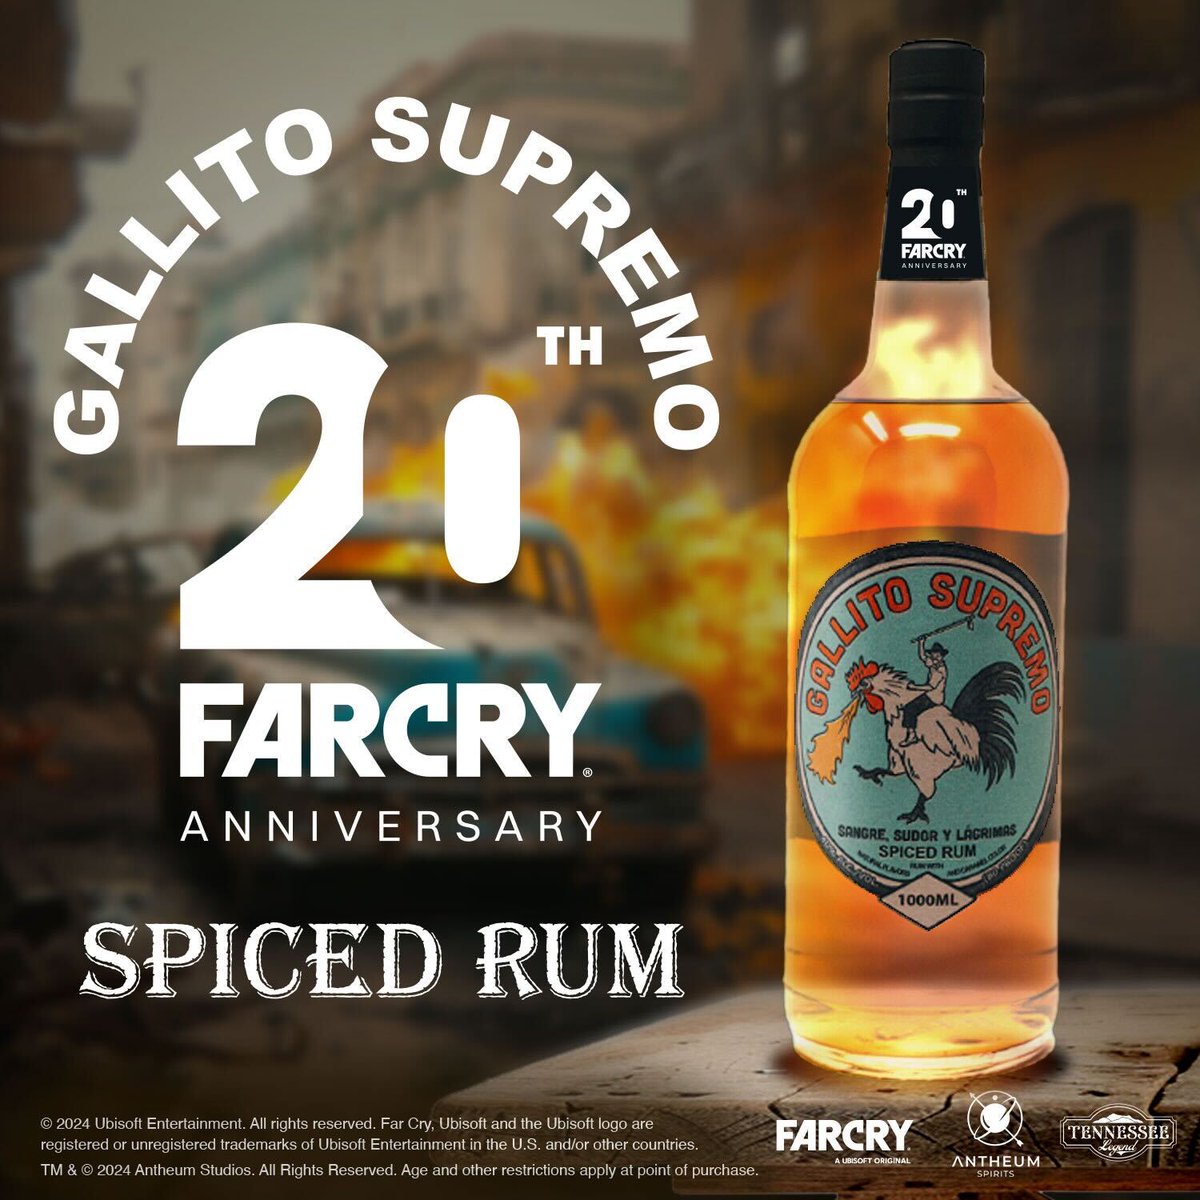 LIMITED EDITION - Antheum Spirits & Tennessee Legend Distillery introduce the Gallito Supremo, a meticulously crafted, limited edition spiced rum, coming straight from Far Cry 6’s unparalleled adventures in the exotic and wondrous landscapes of Yara. Arriving just in time to